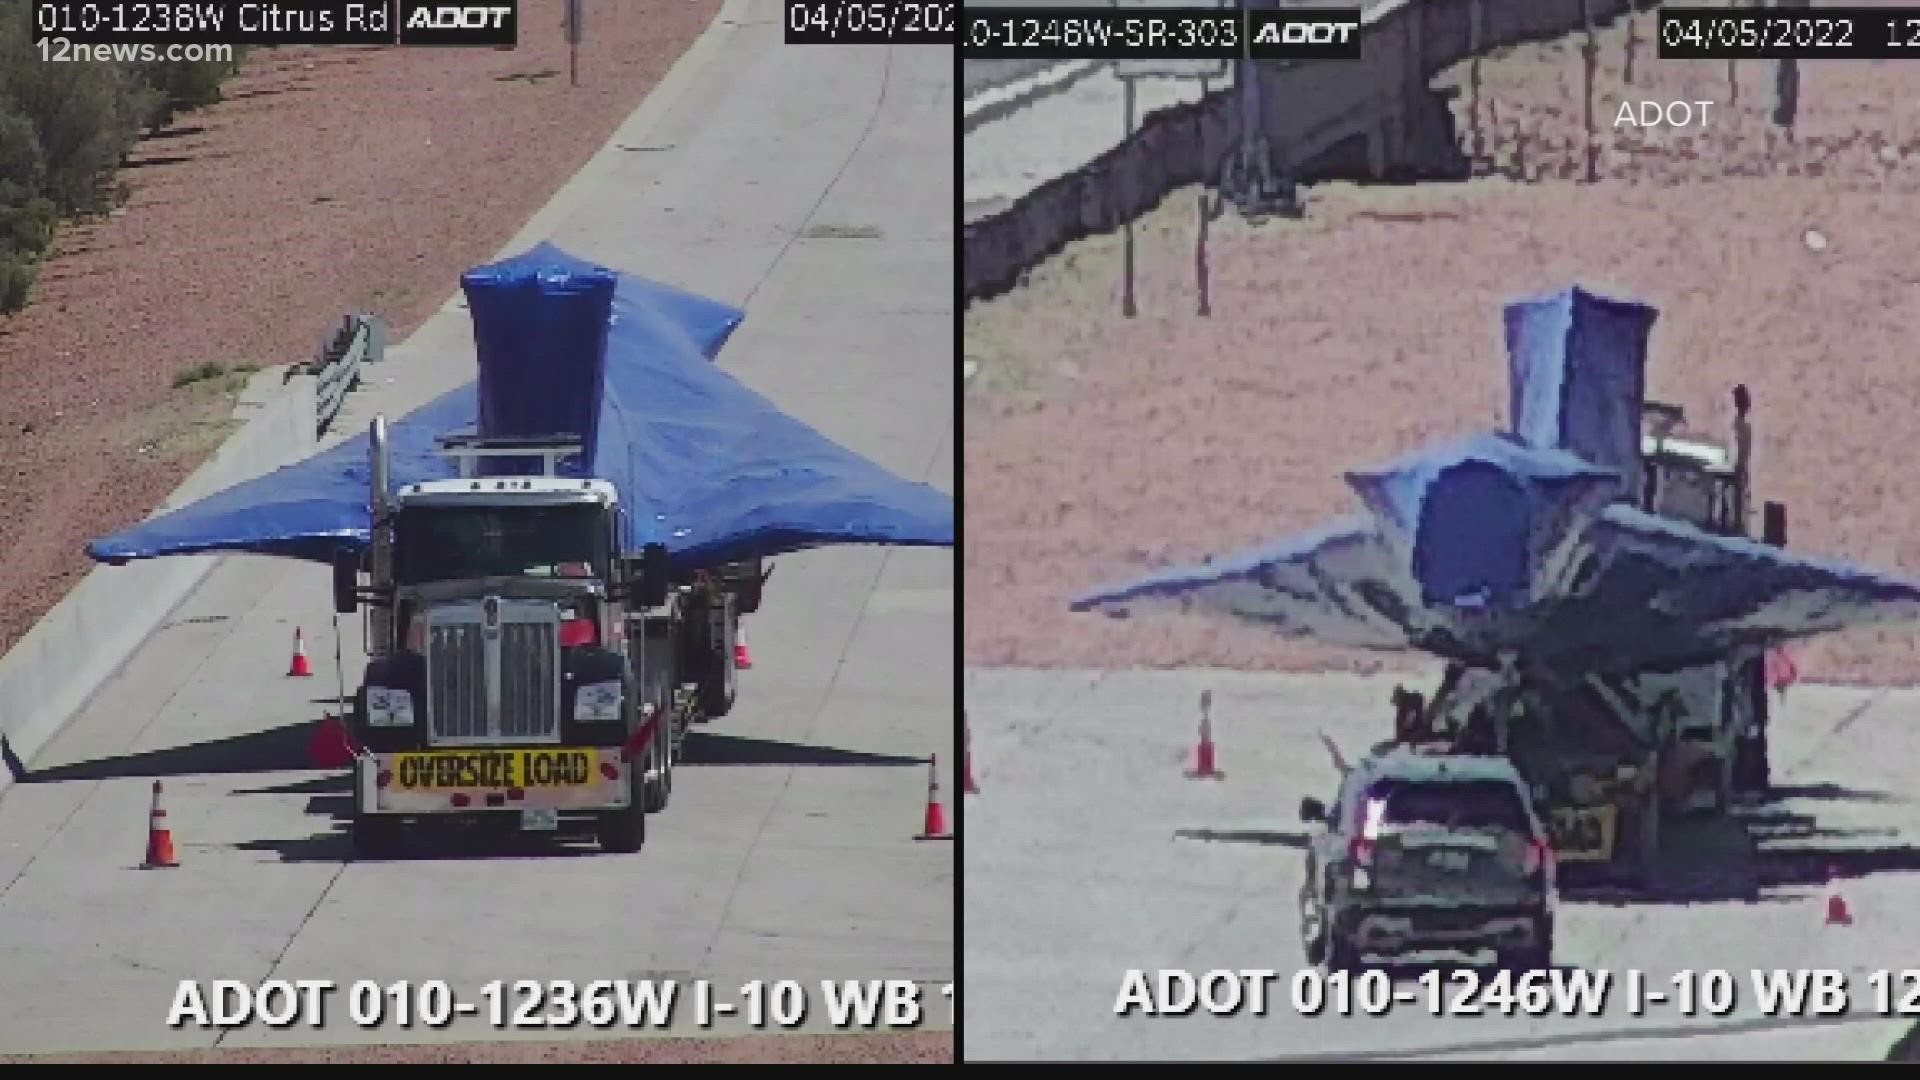 A bizarre object wrapped in blue plastic on a flatbed trailer parked alongside I-10 was tweeted out by ADOT. Some thought it was aliens!